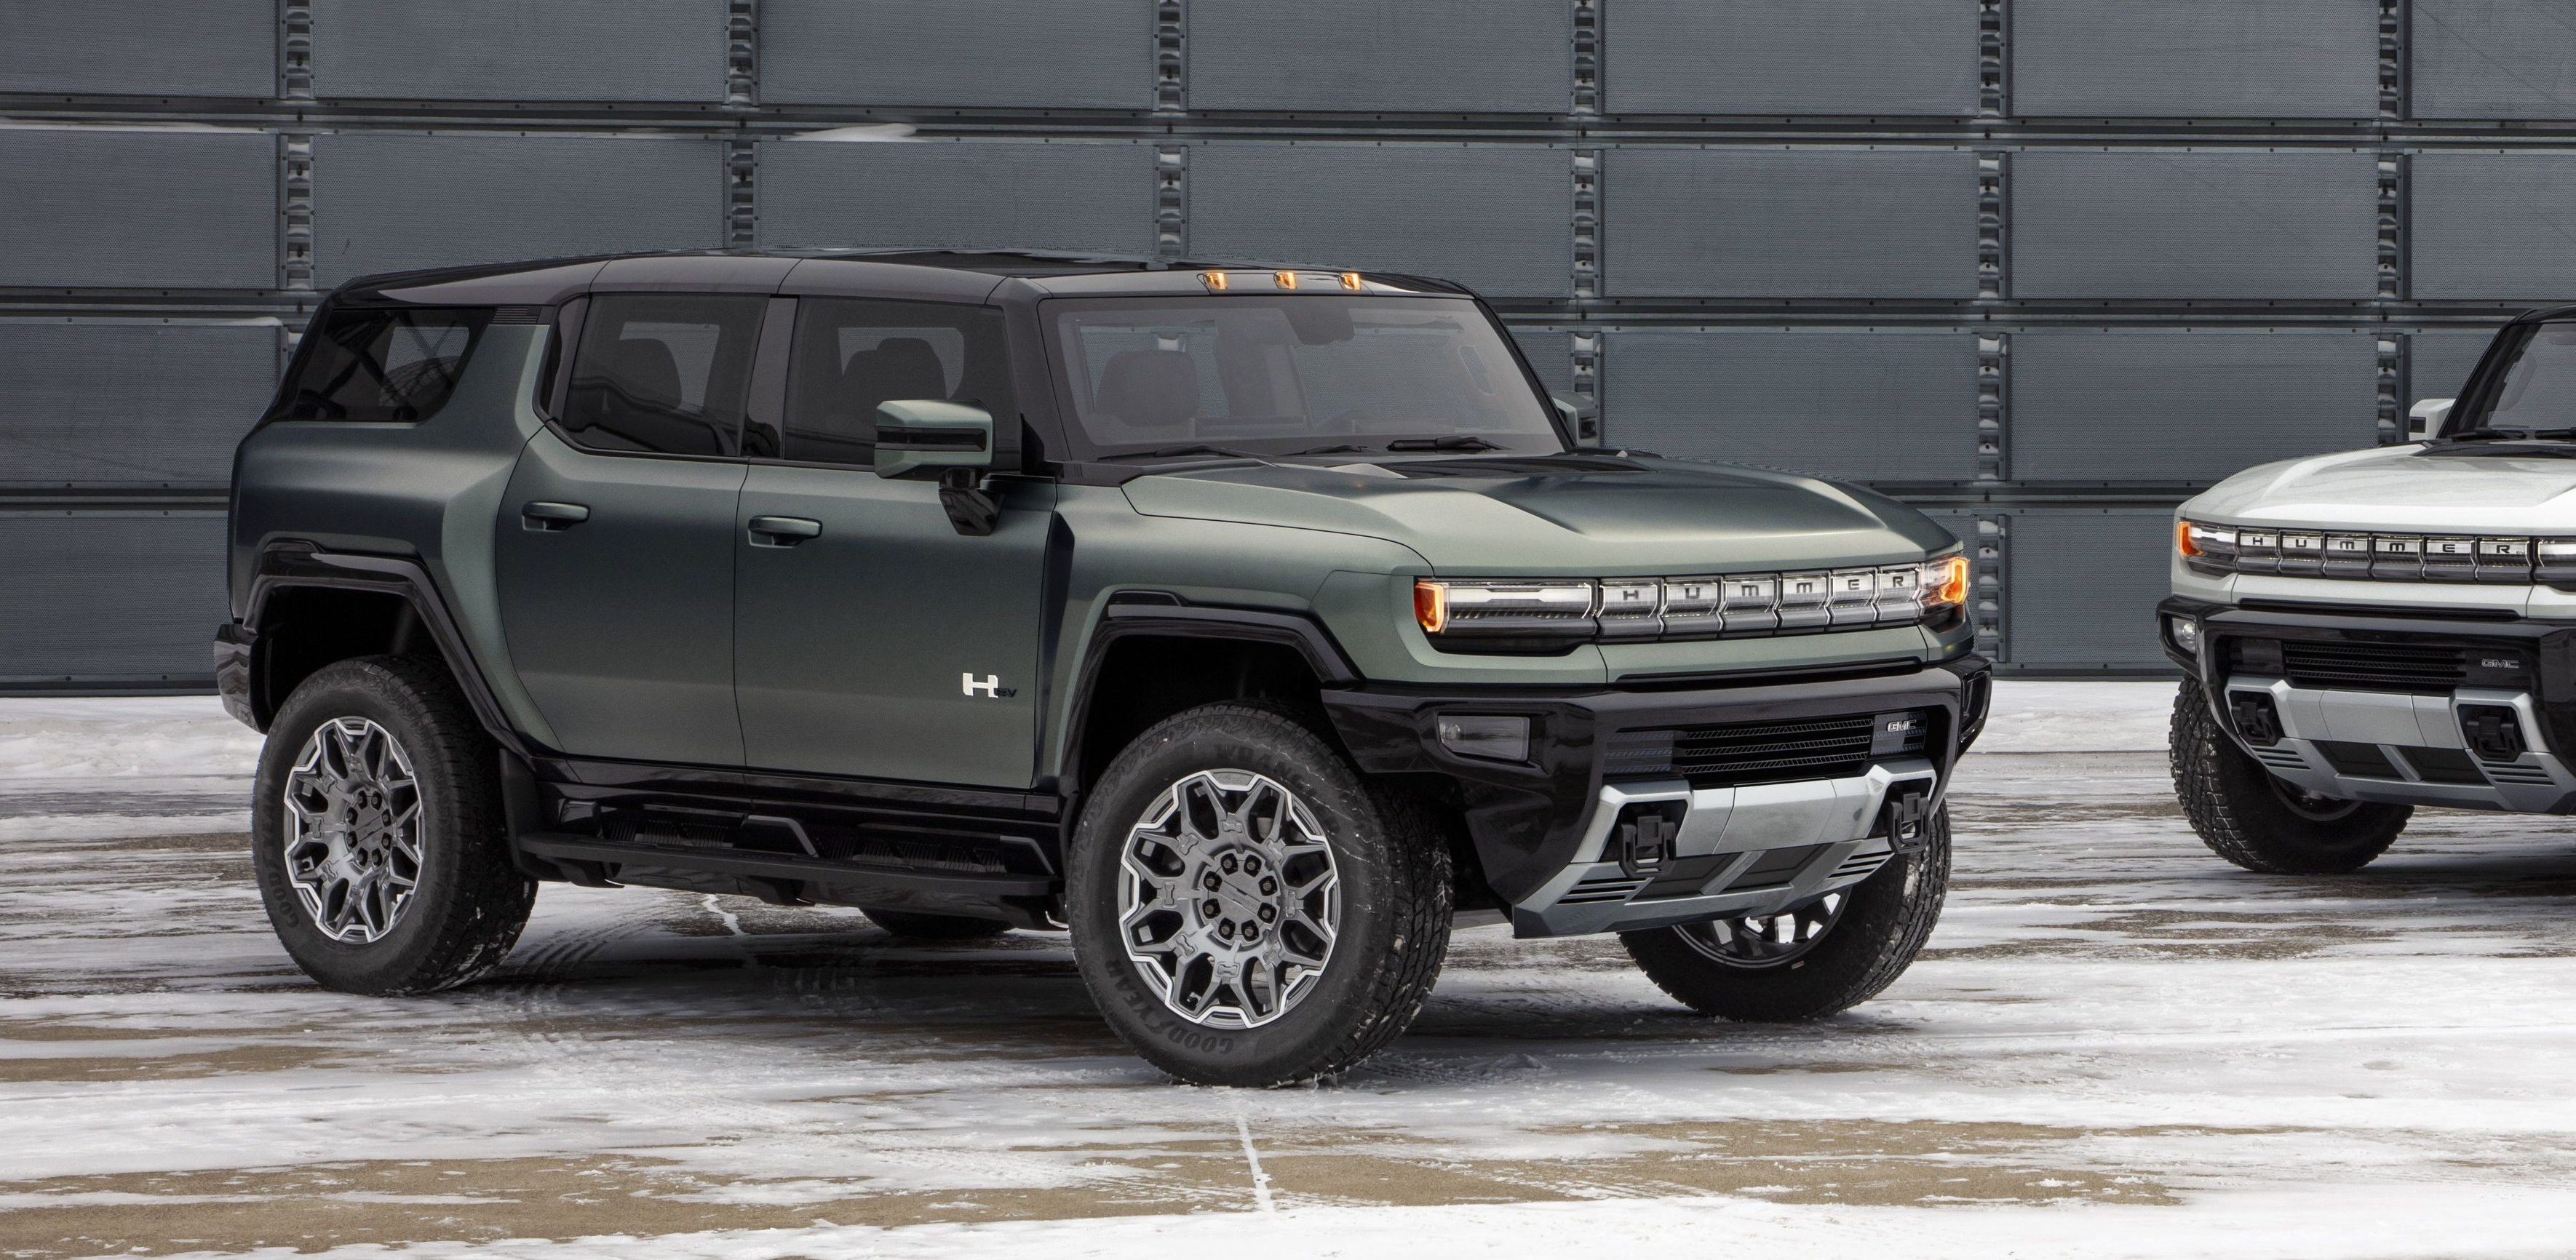 GM unveils Hummer EV SUV version starting at $80,000, but it is going to  take a while | Electrek